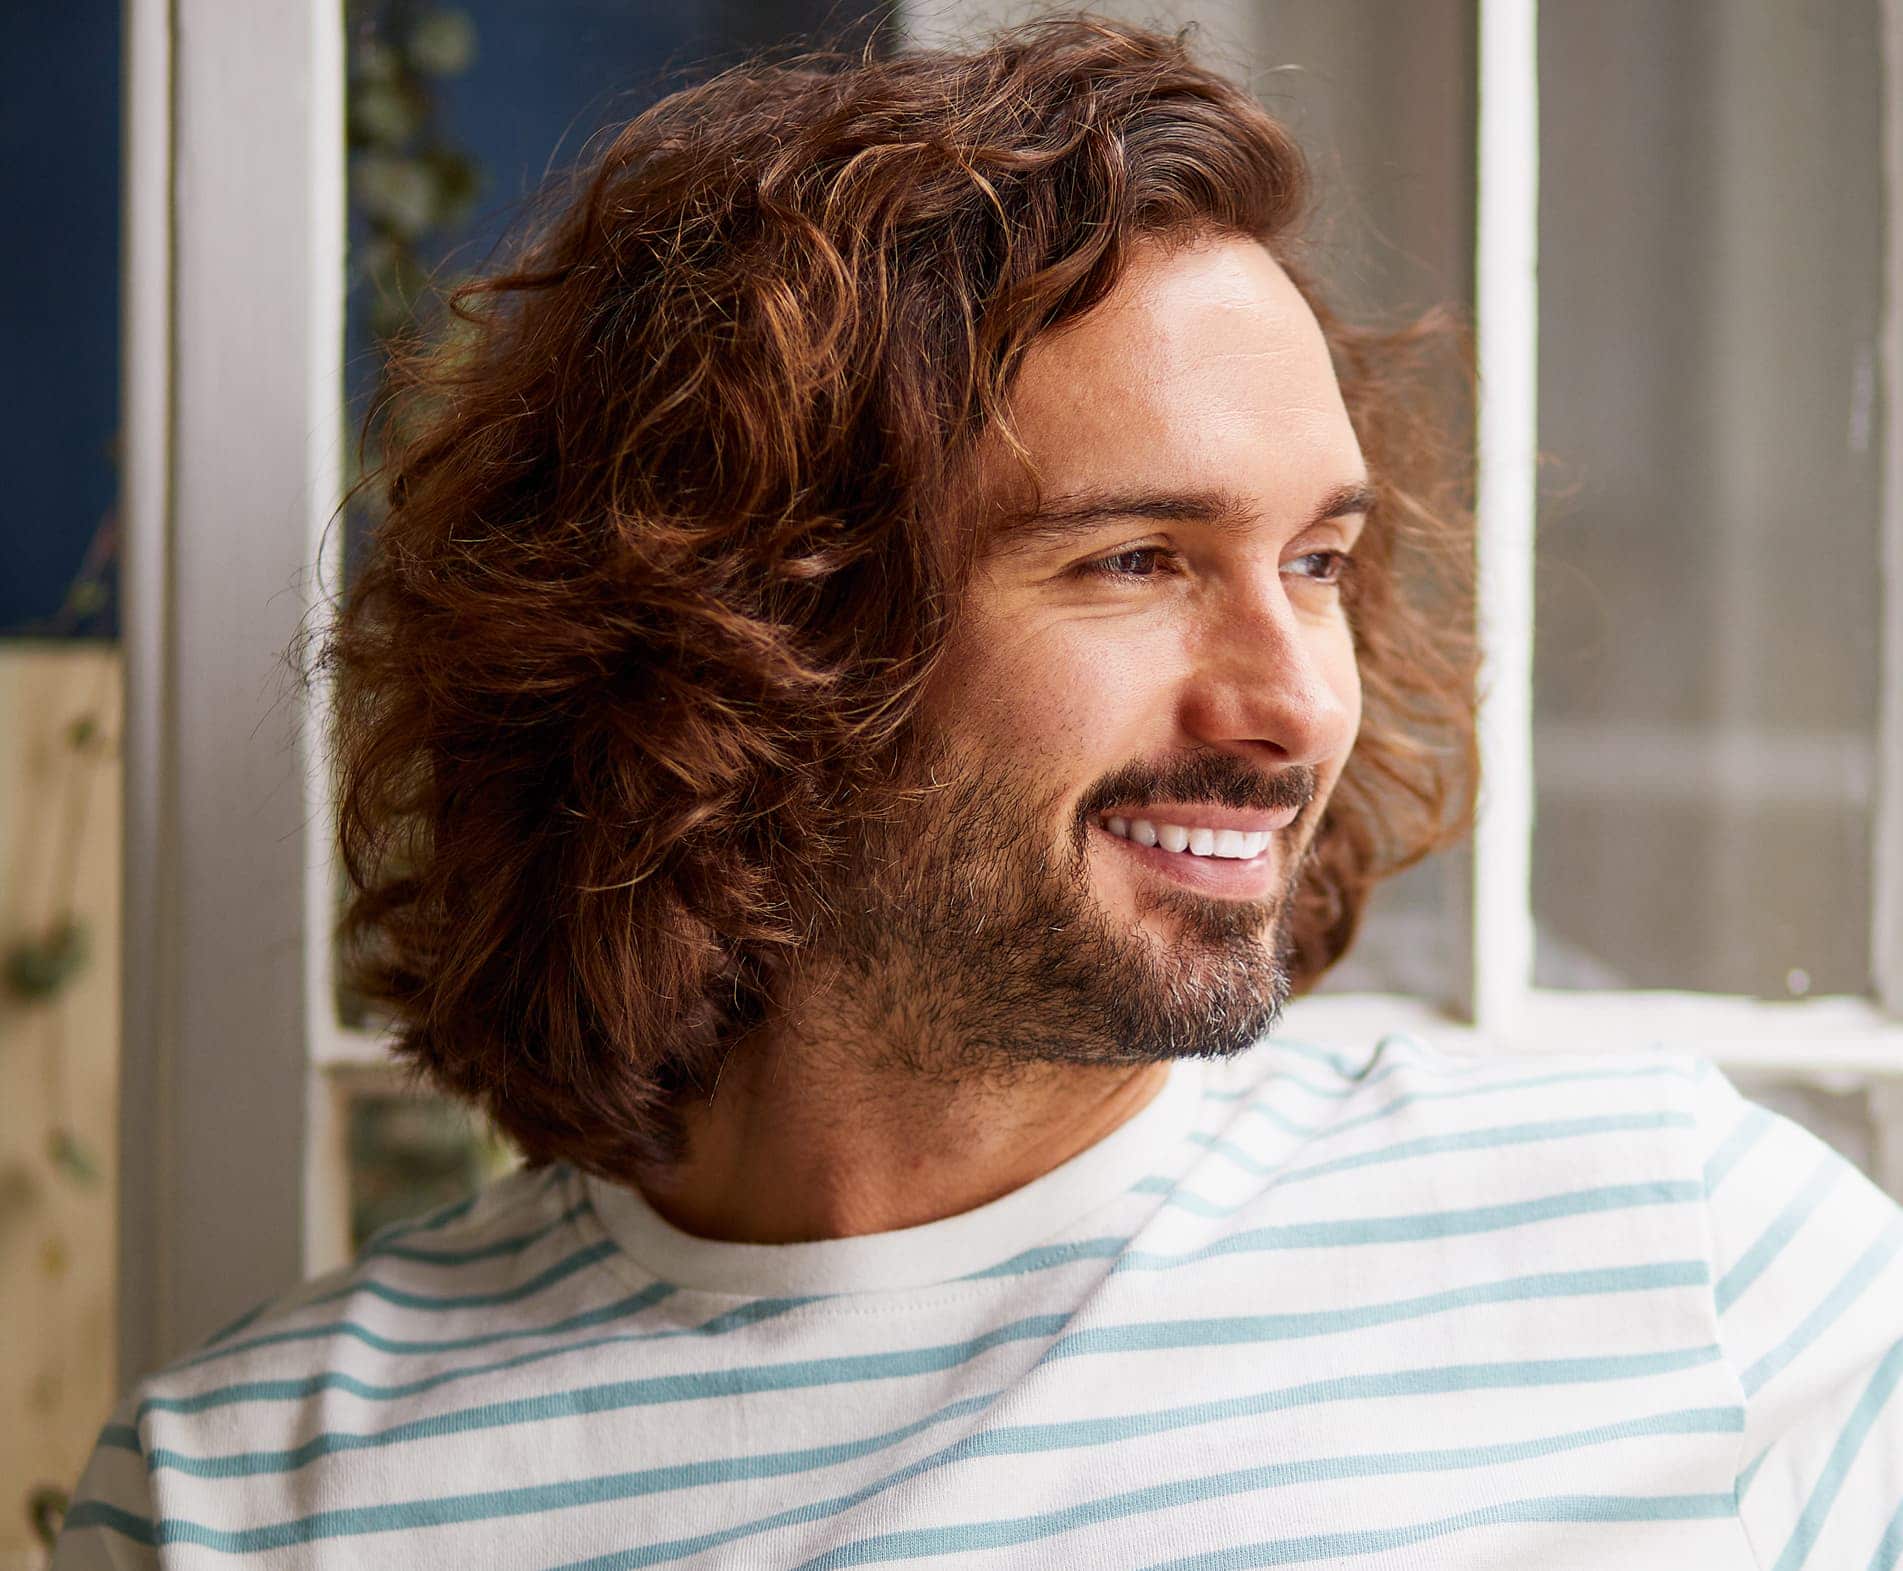 Joe Wicks On The Link Between Food And Mental Health, The Power Of Ice Baths, And Working With Louis Theroux